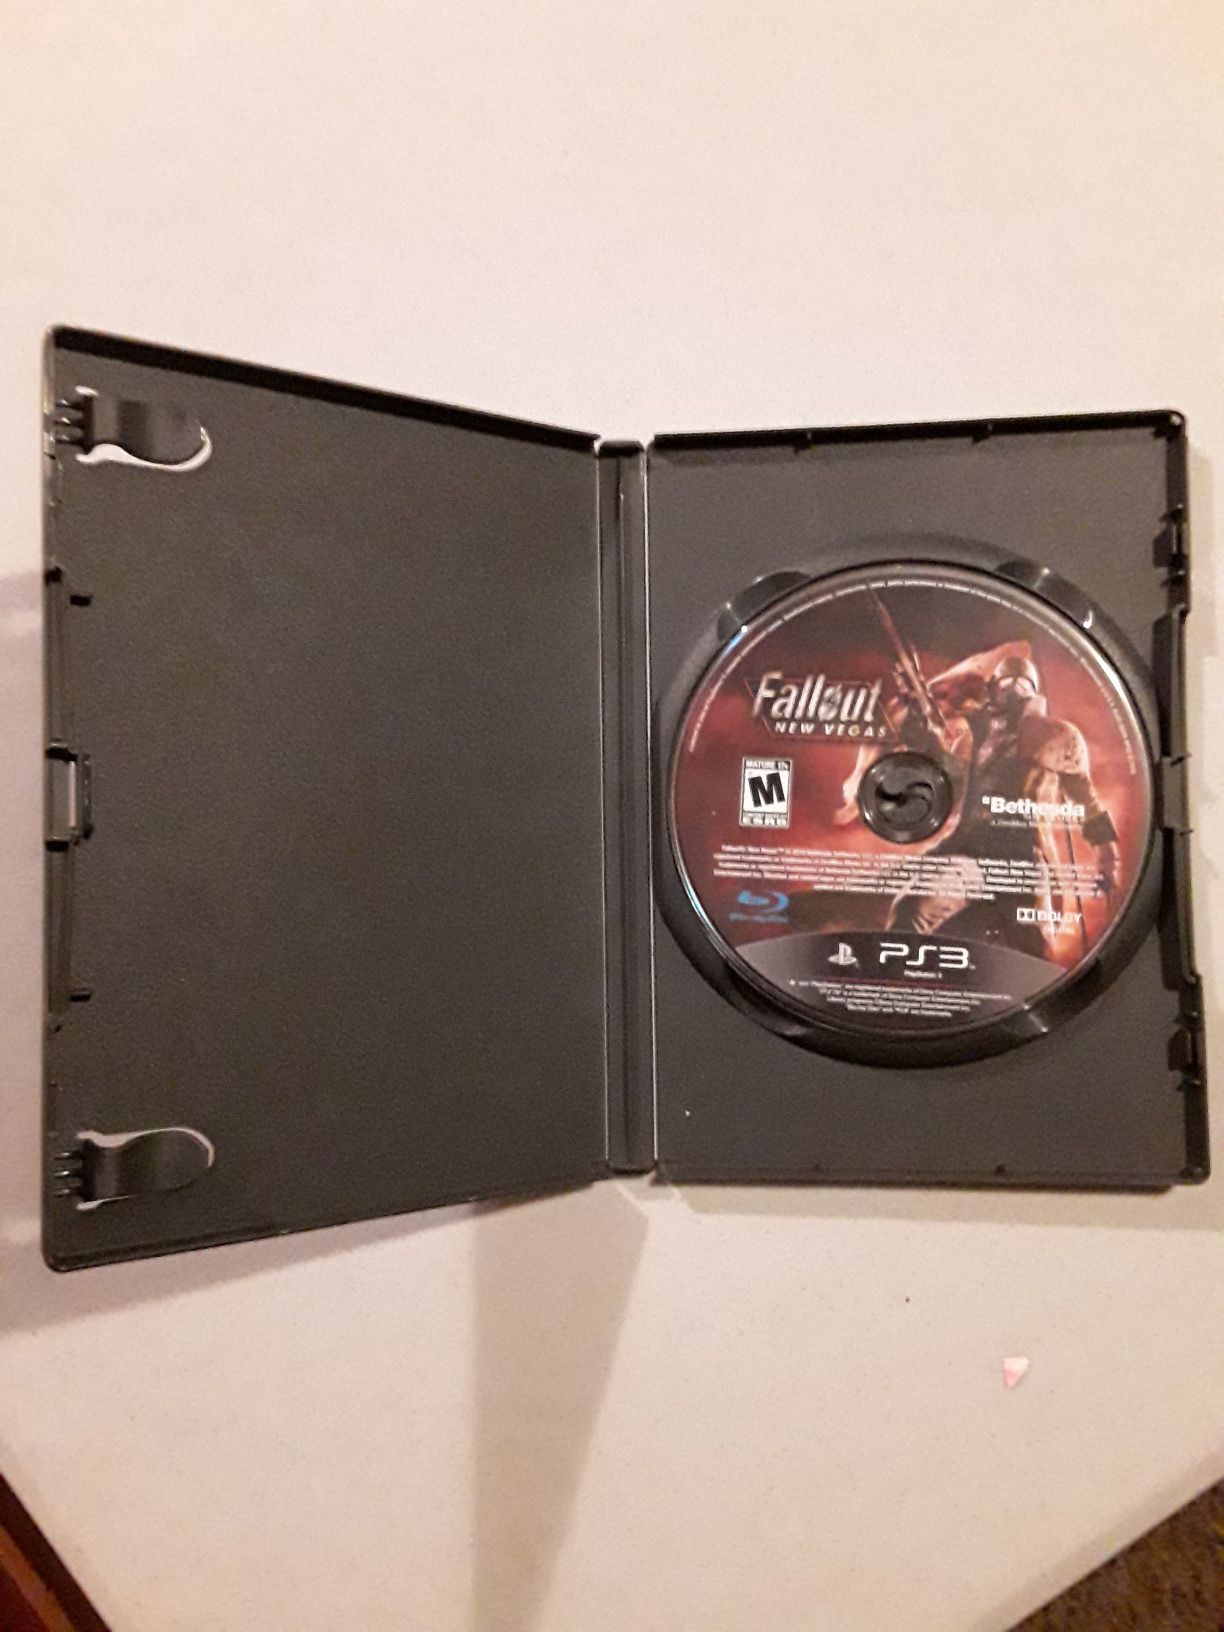 PS3 videogame. Fallout : New Vegas